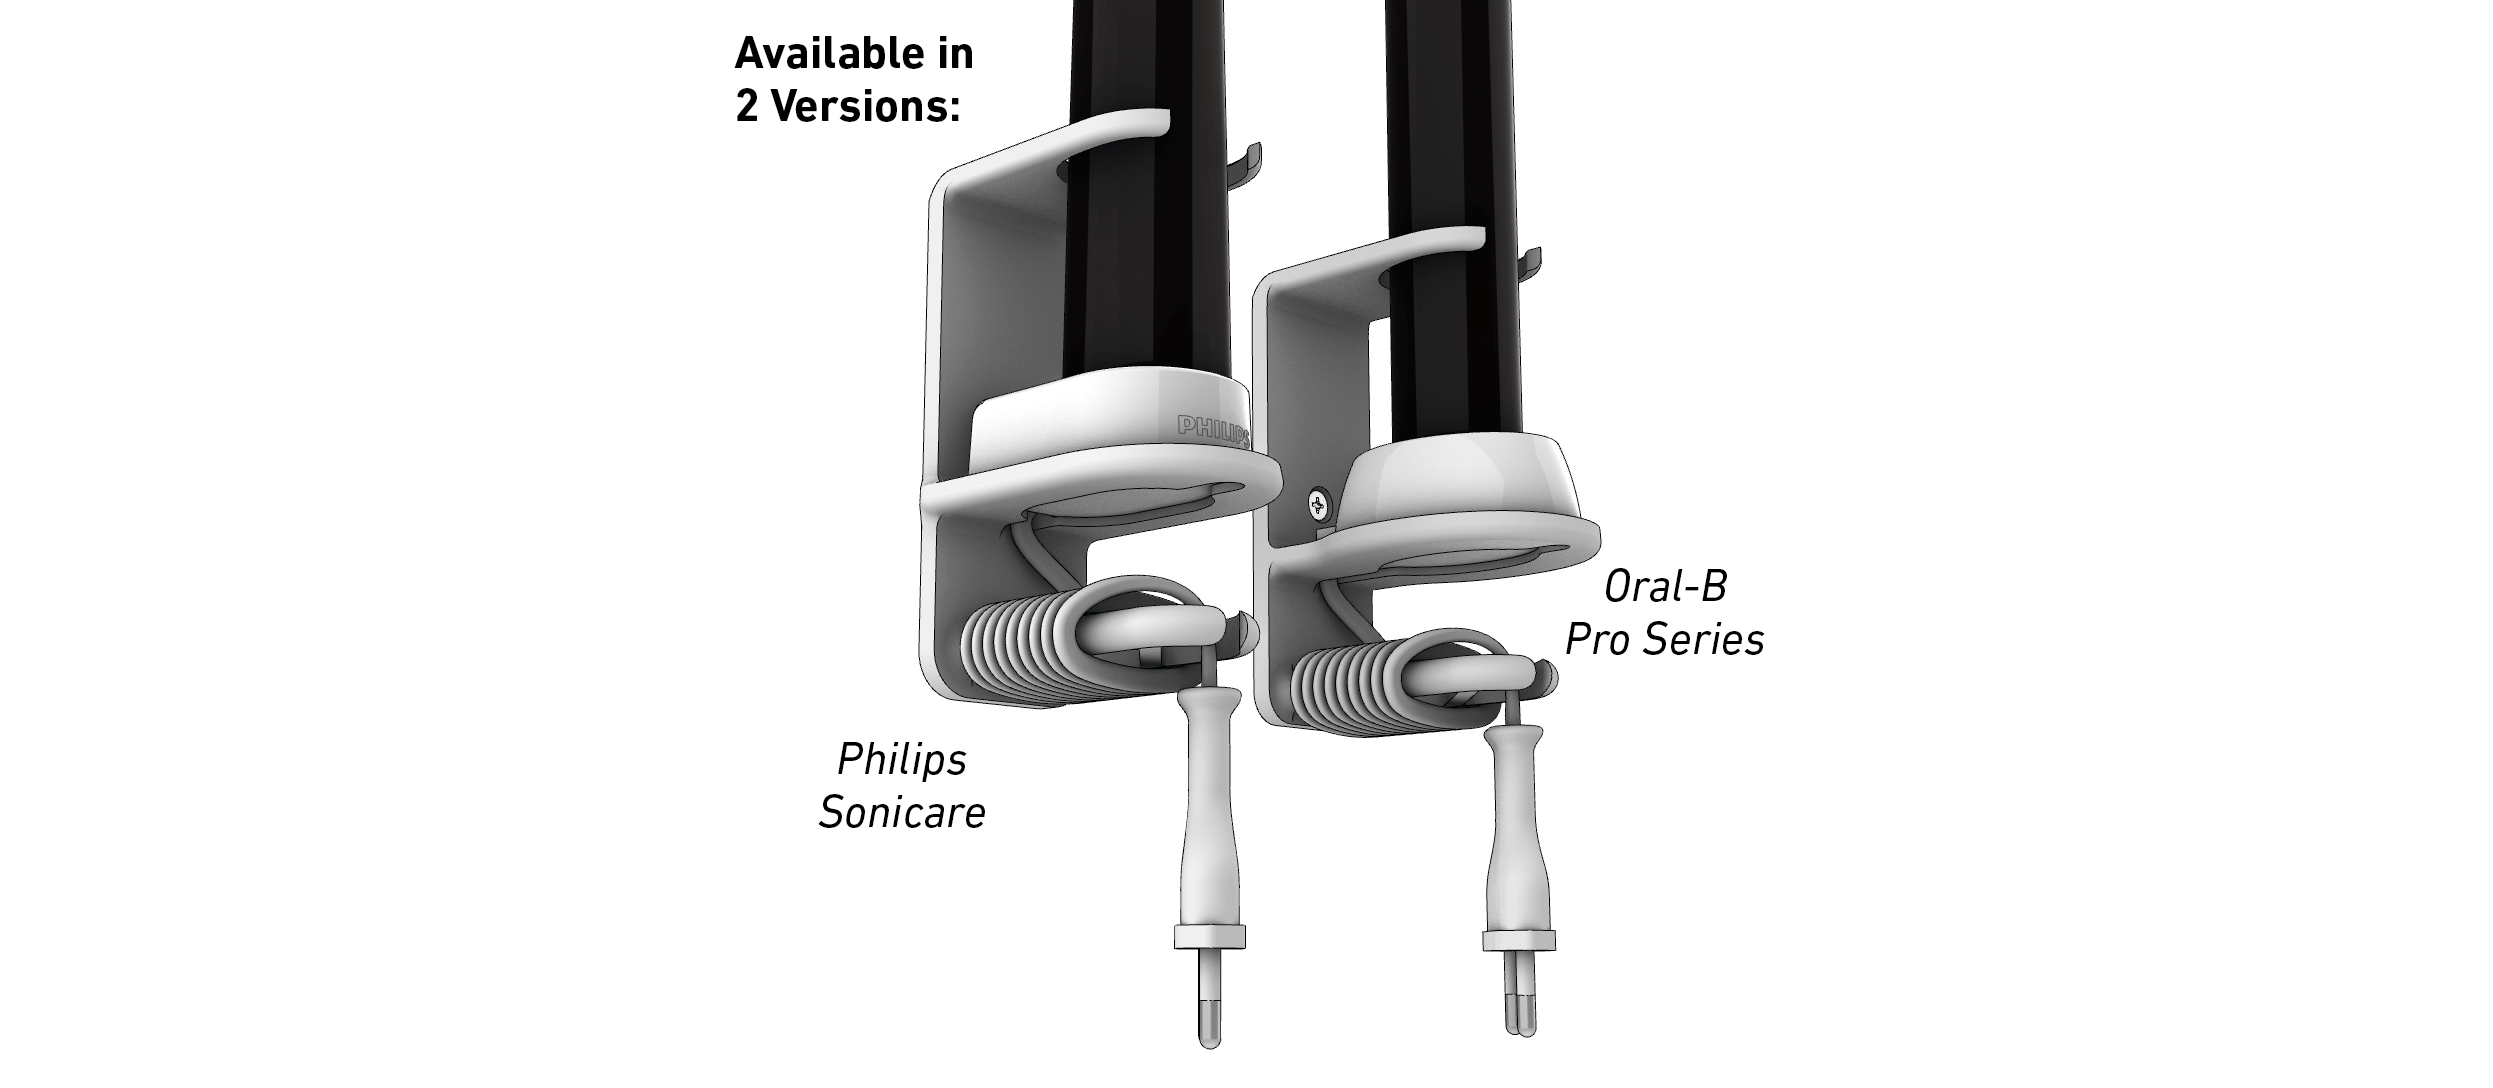 Toothbrush + Induction Charger Wall Mount (Oral-B & Philips Sonicare)